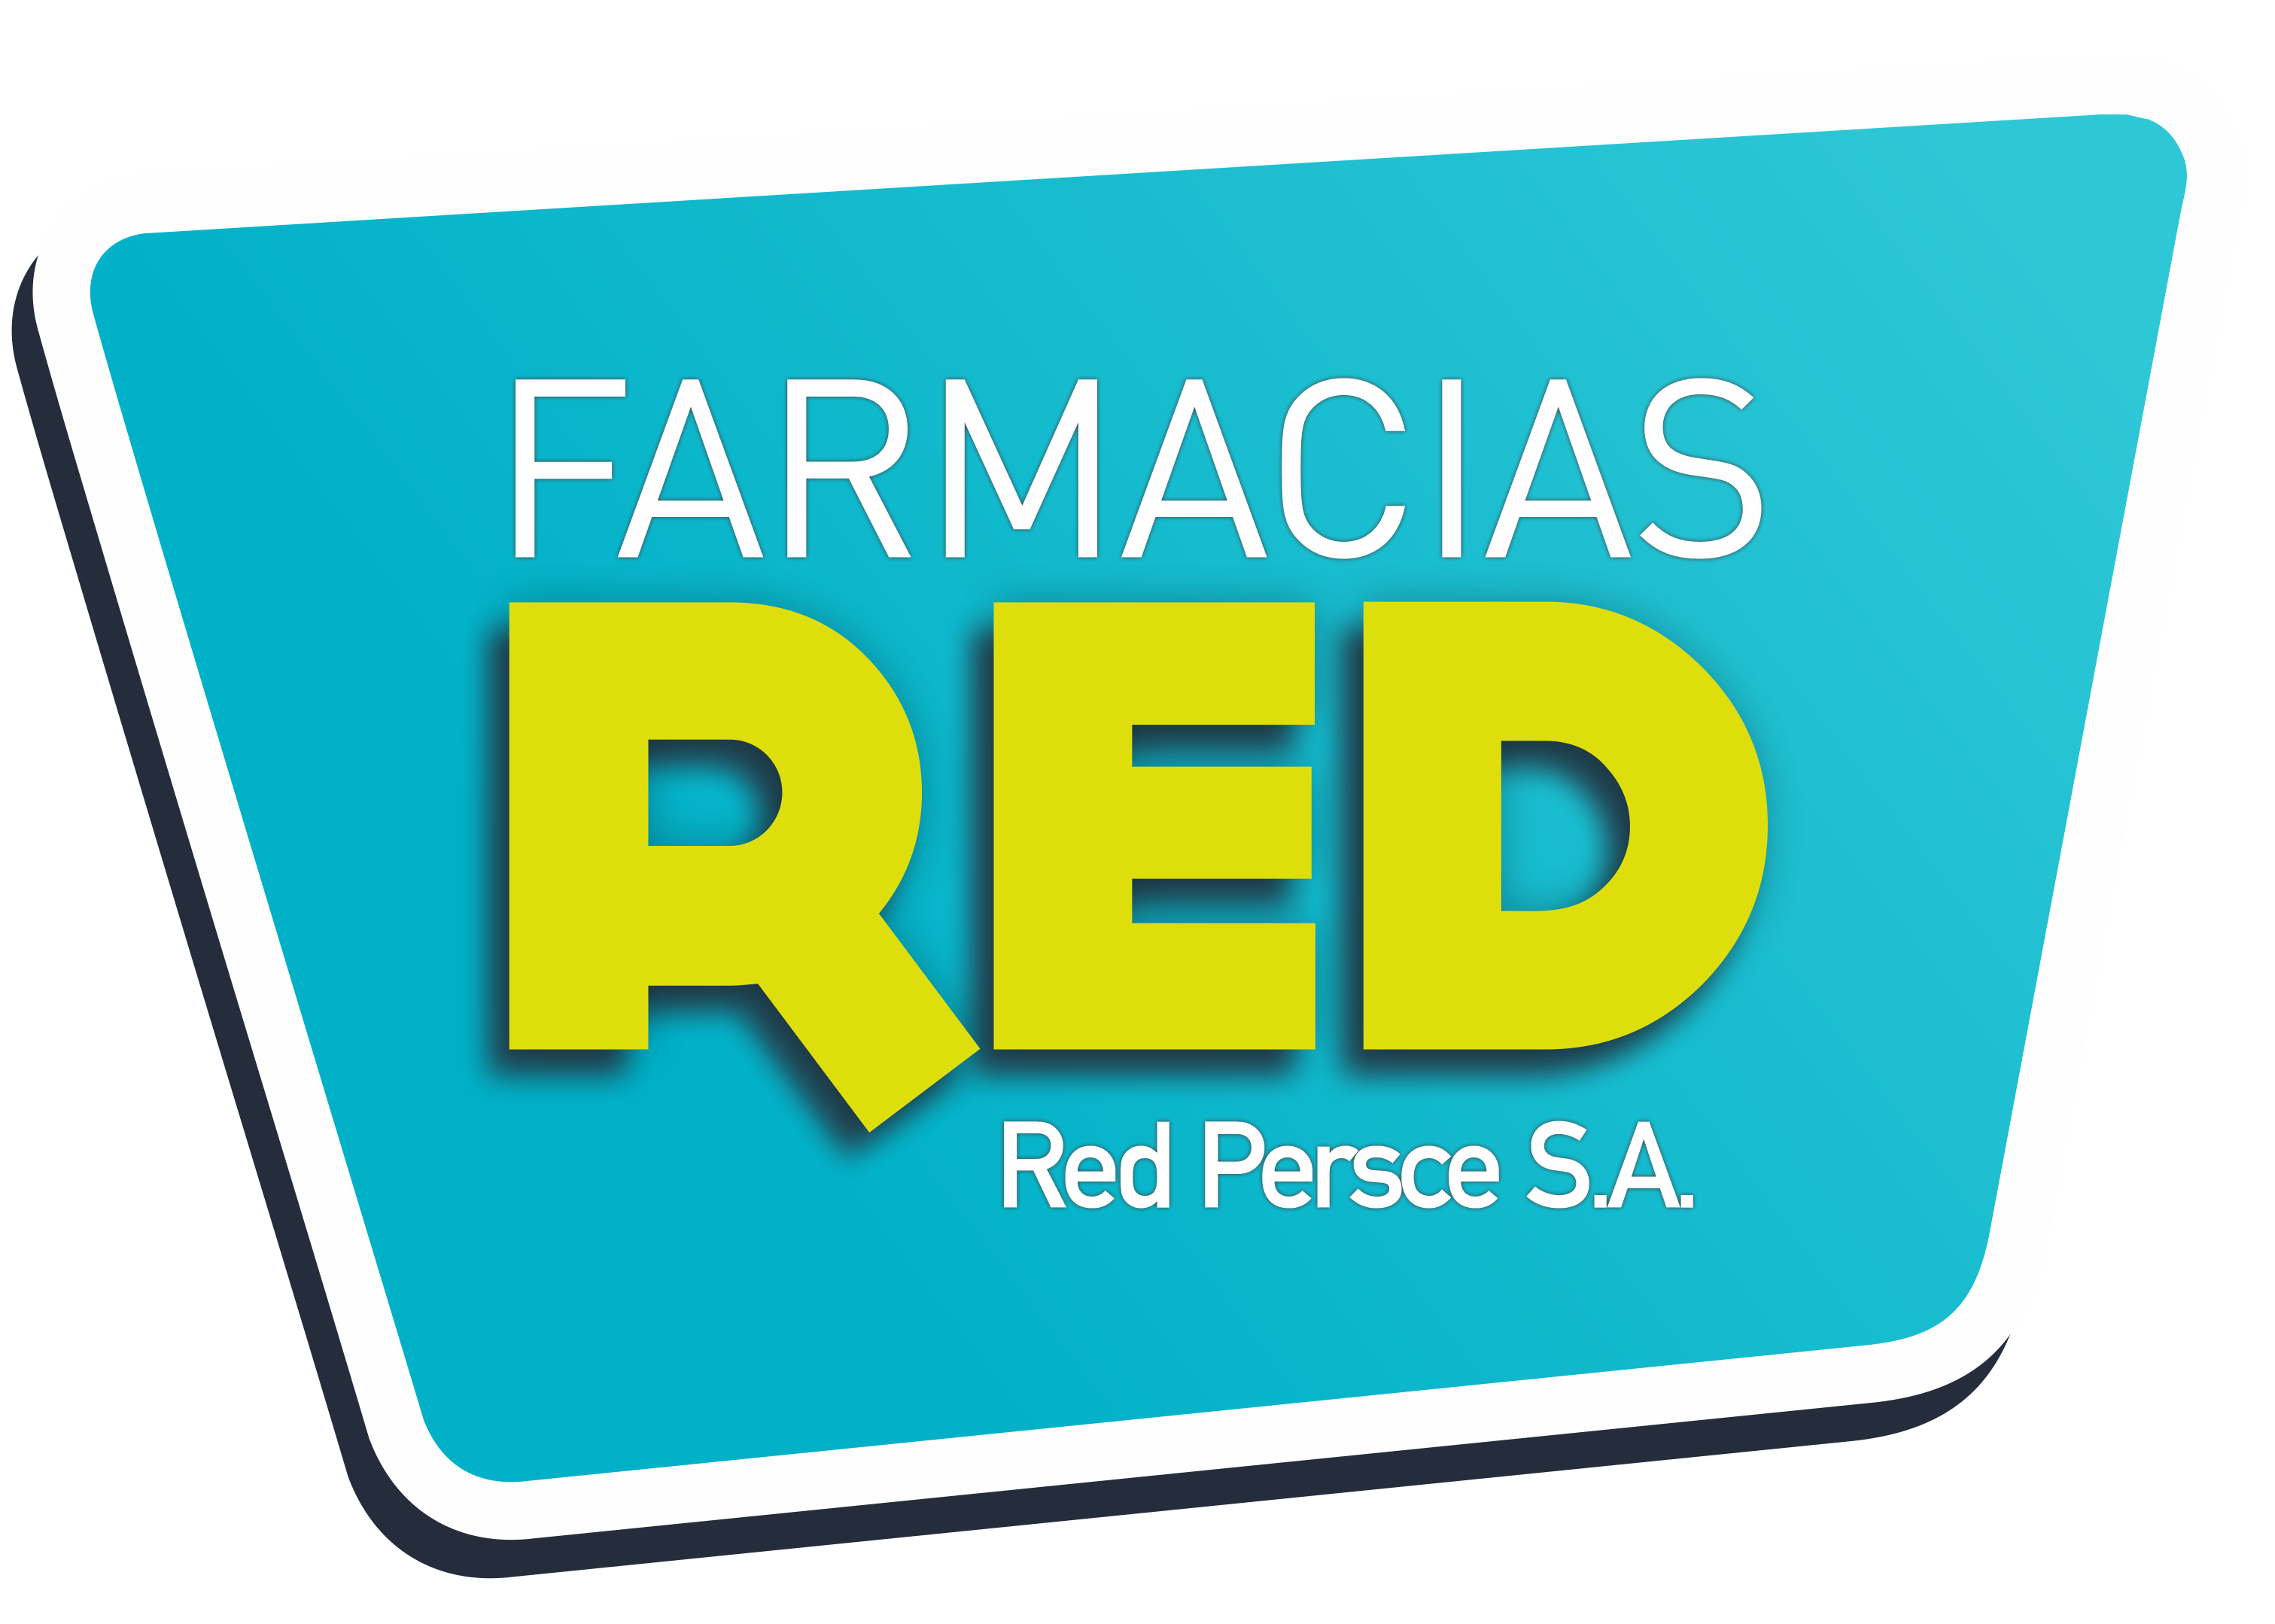 Red Persce S.A